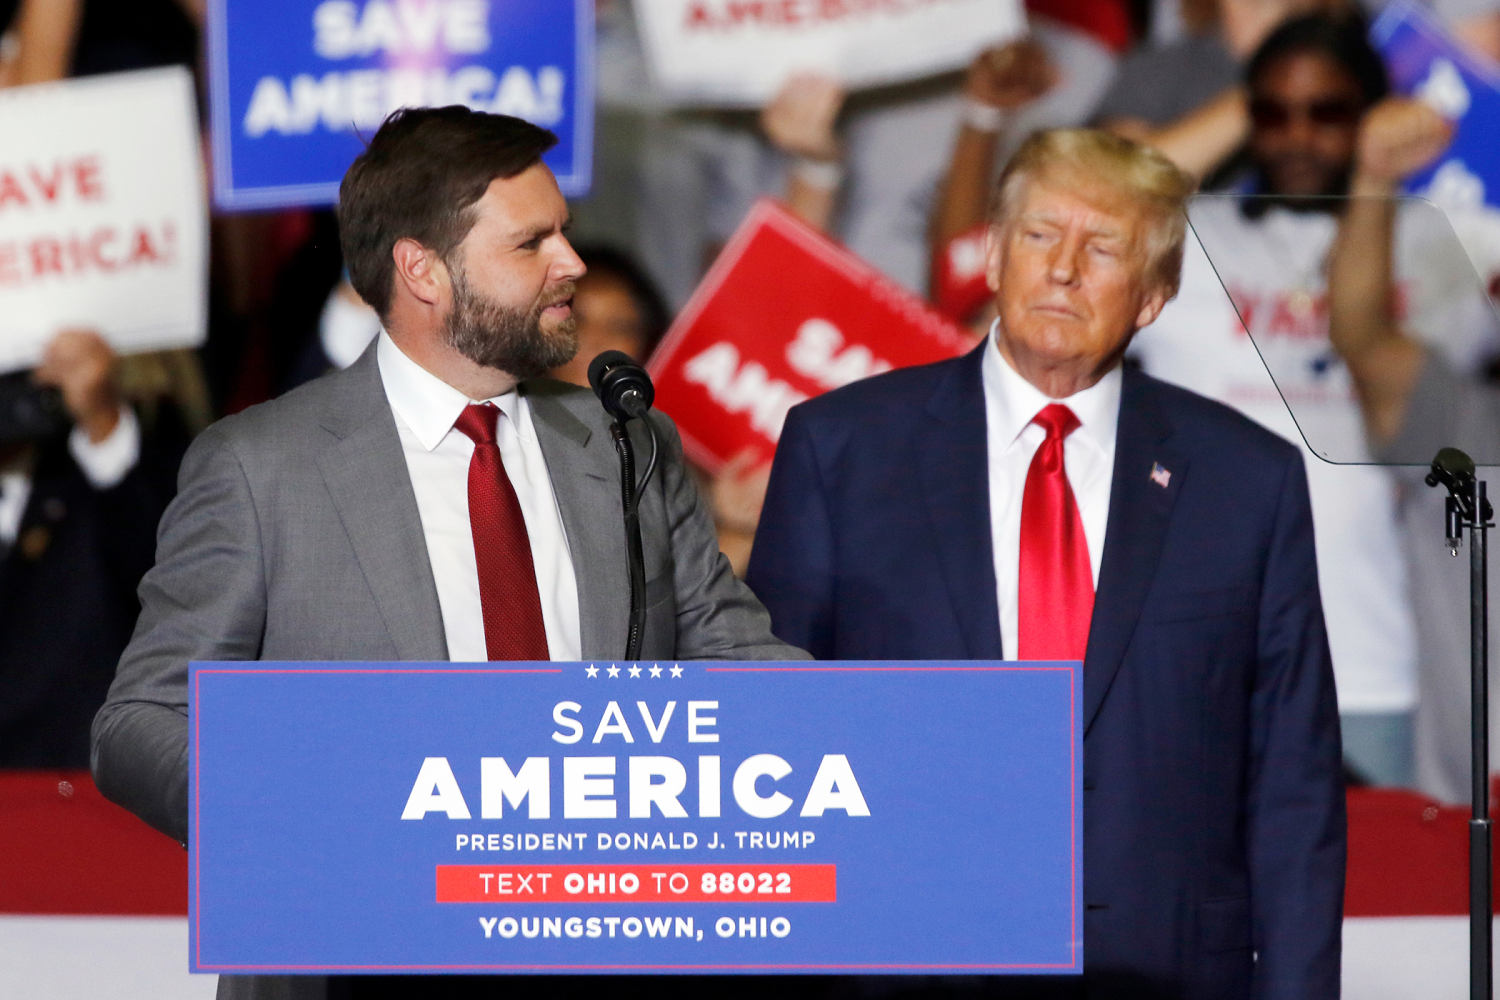 jd vance's vp prospects could rise after he helped deliver trump a big ohio win